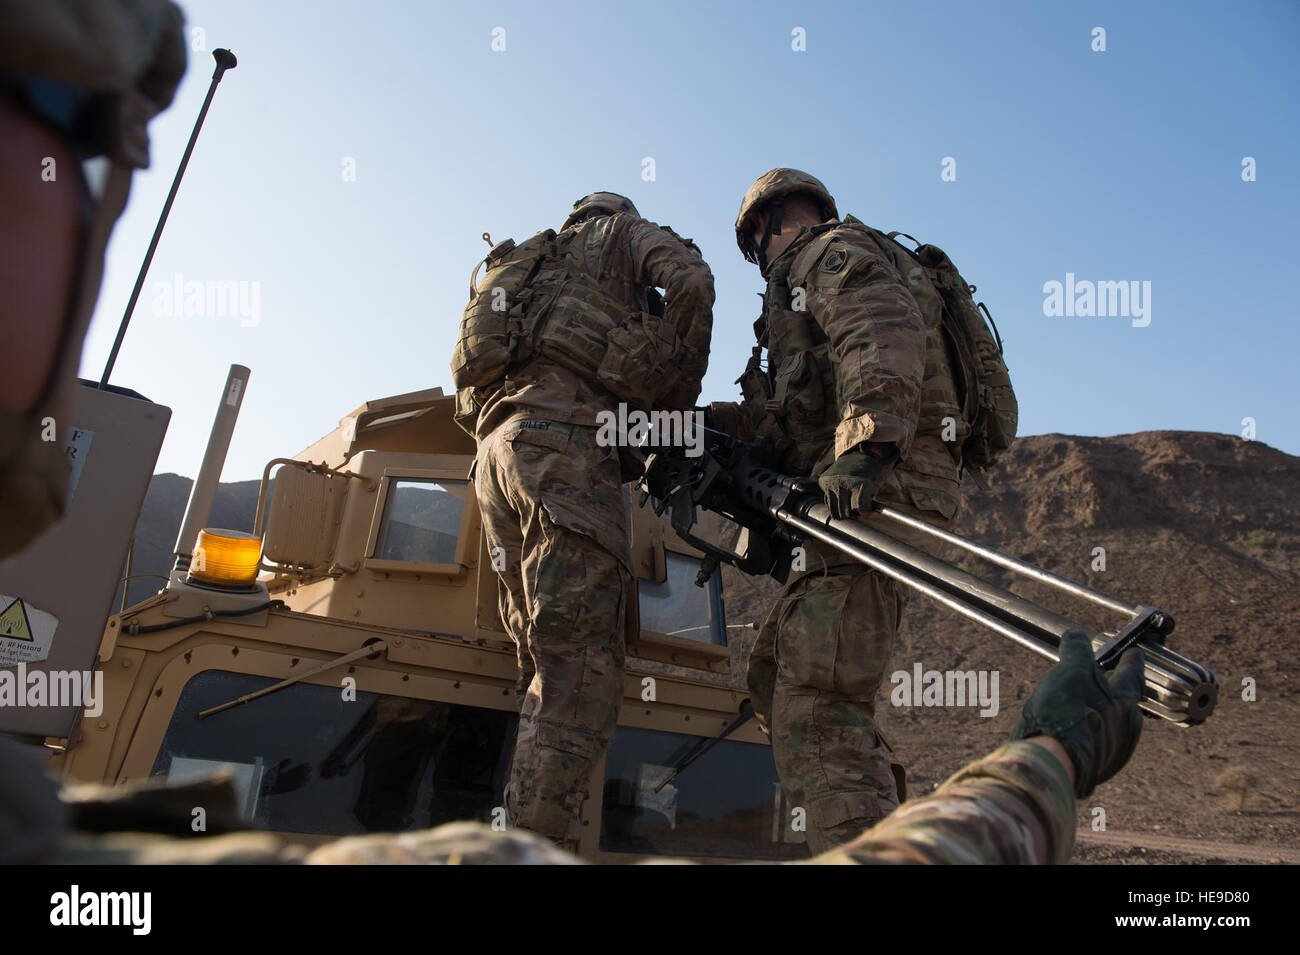 U.S. Soldiers assigned to Delta Company, 2nd Battalion, 124th Infantry Regiment, Combined Joint Task Force-Horn of Africa (CJTF-HOA), mount an M2A1 machine gun to a Humvee during a live-fire exercise in Arta, Djibouti, Jan. 8, 2016. Through unified action with U.S. and international partners in East Africa, CJTF-HOA conducts security force assistance, executes military engagement, provides force protection, and provides military support to regional counter-violent extremist organization operations in order to support aligned regional efforts, ensure regional access and freedom of movement, and Stock Photo